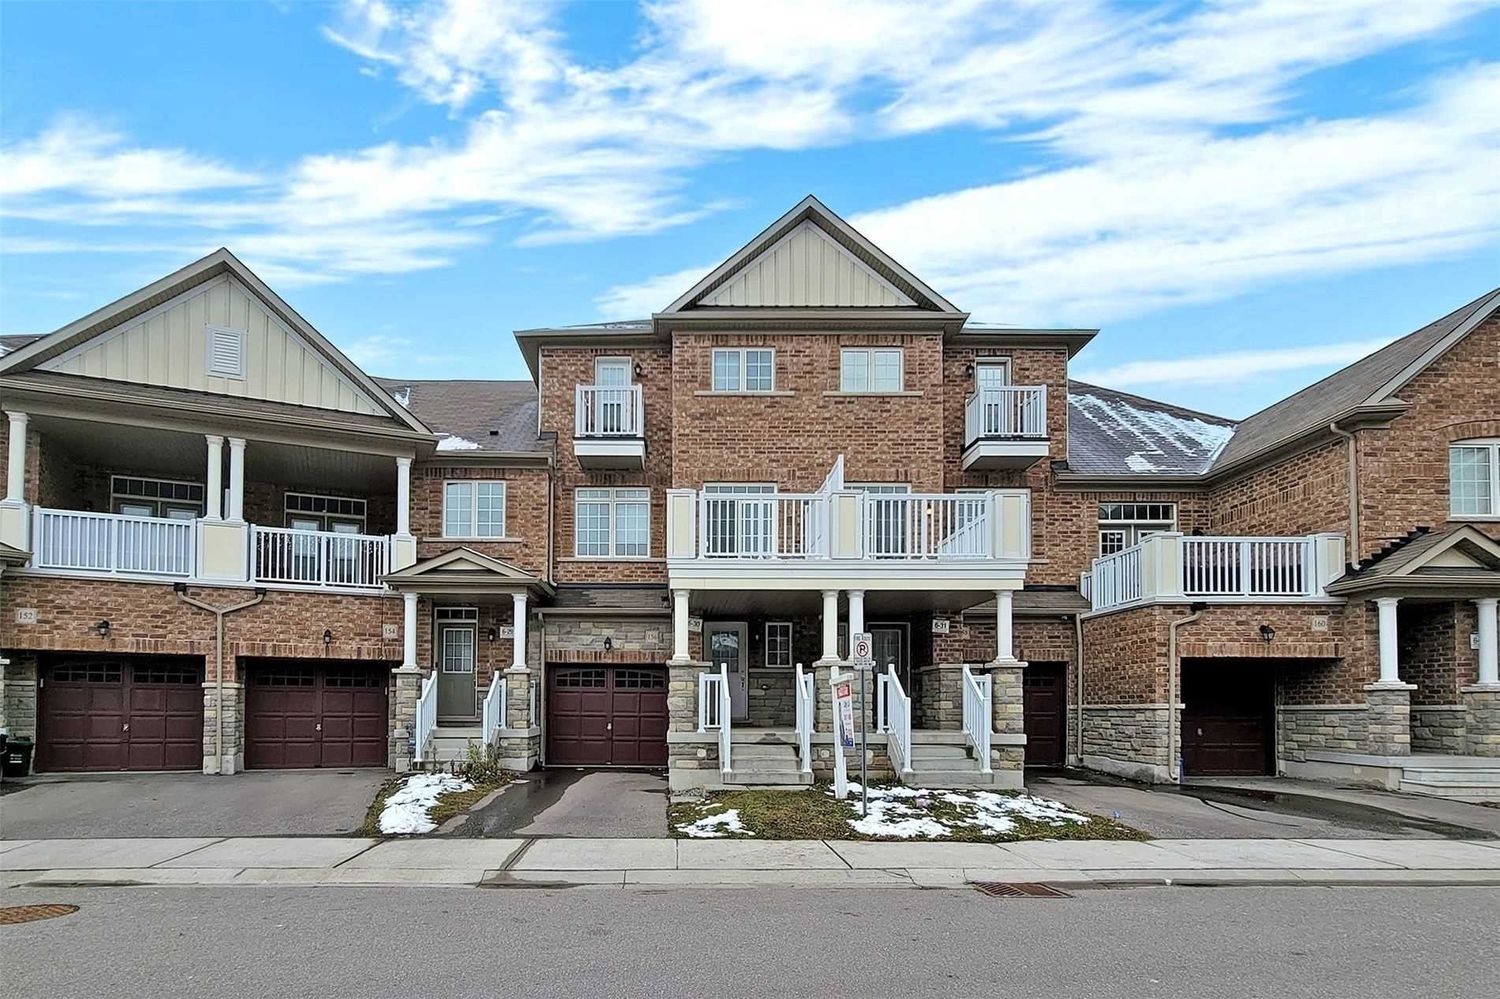 1-170 Roy Grove Way. Markham Meadows Townhomes is located in  Markham, Toronto - image #2 of 2